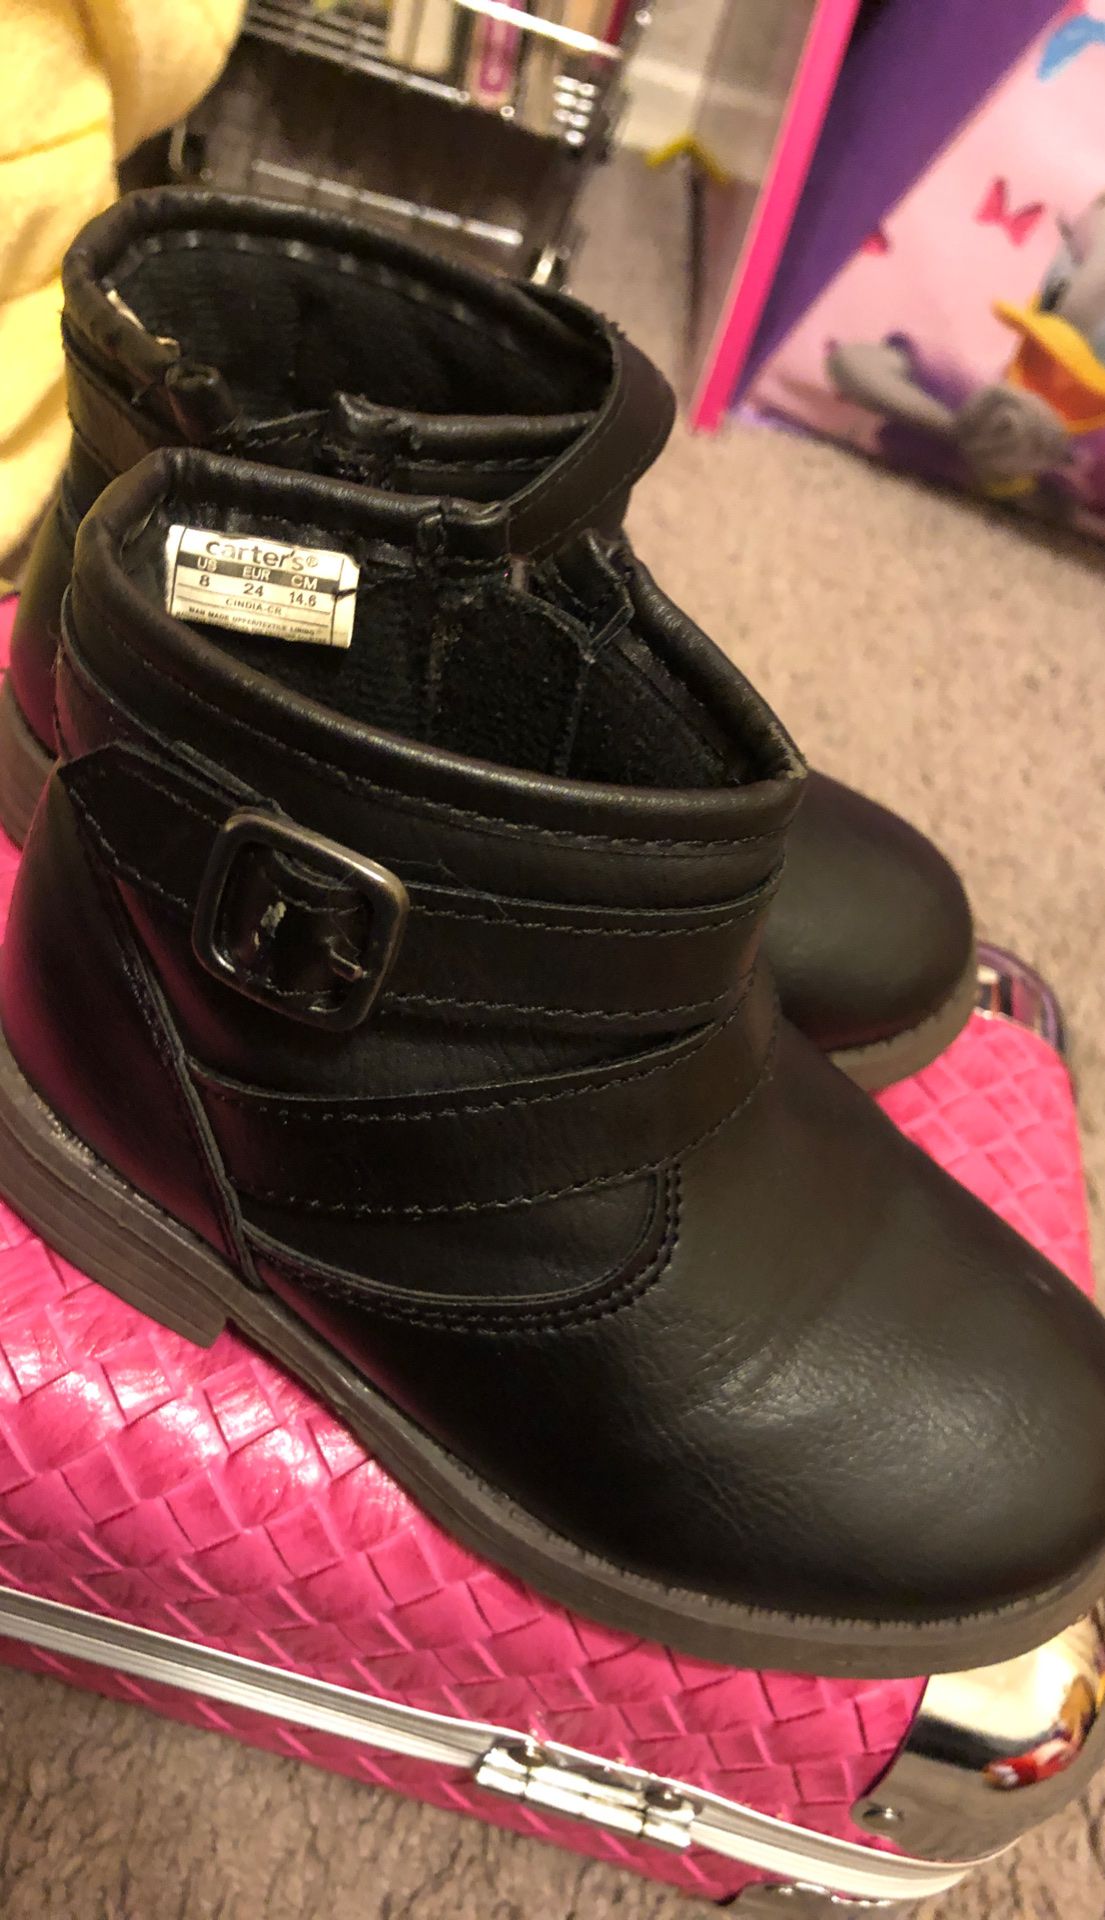 Carters boots for little girls